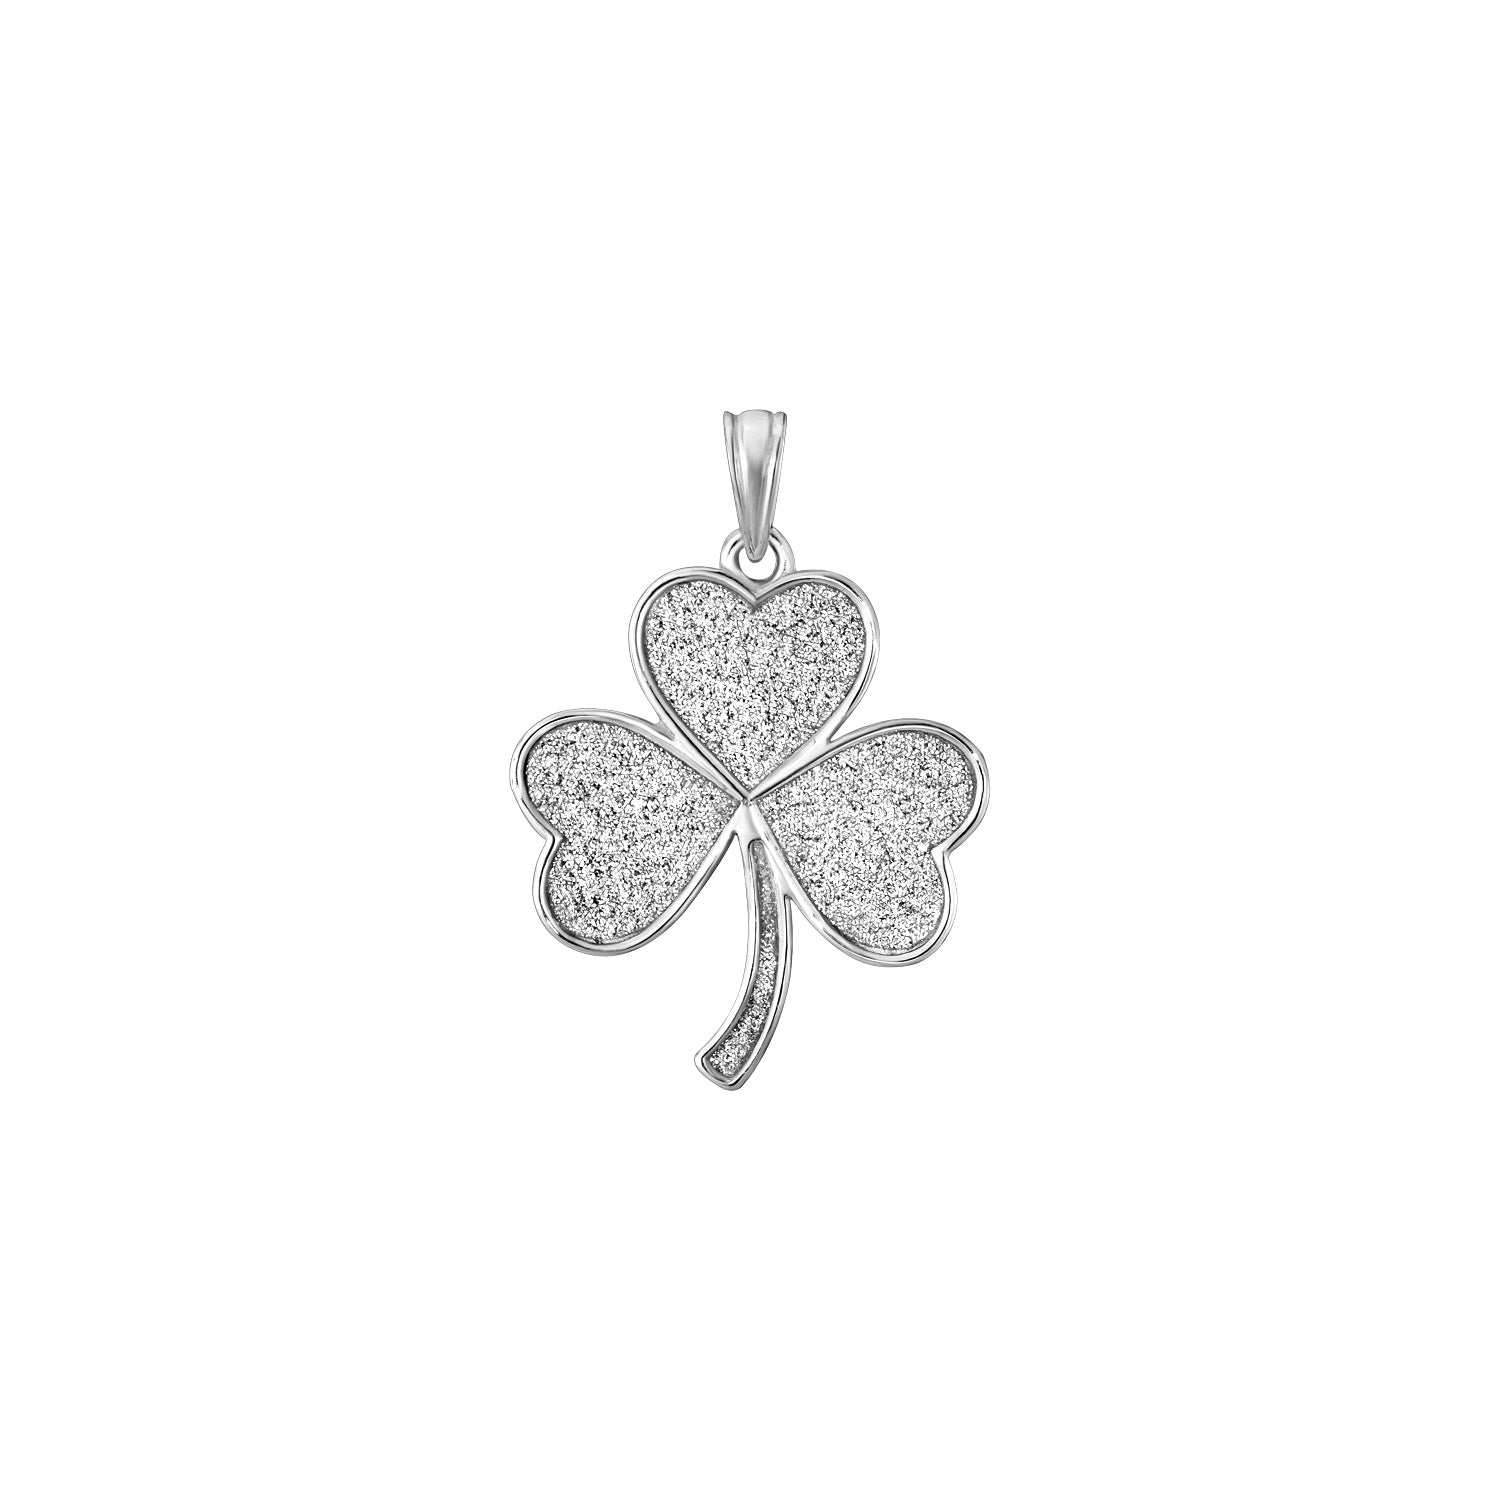 925 STERLING SILVER SHARMROCK PENDANT CHARM WITH GLITTER F75172